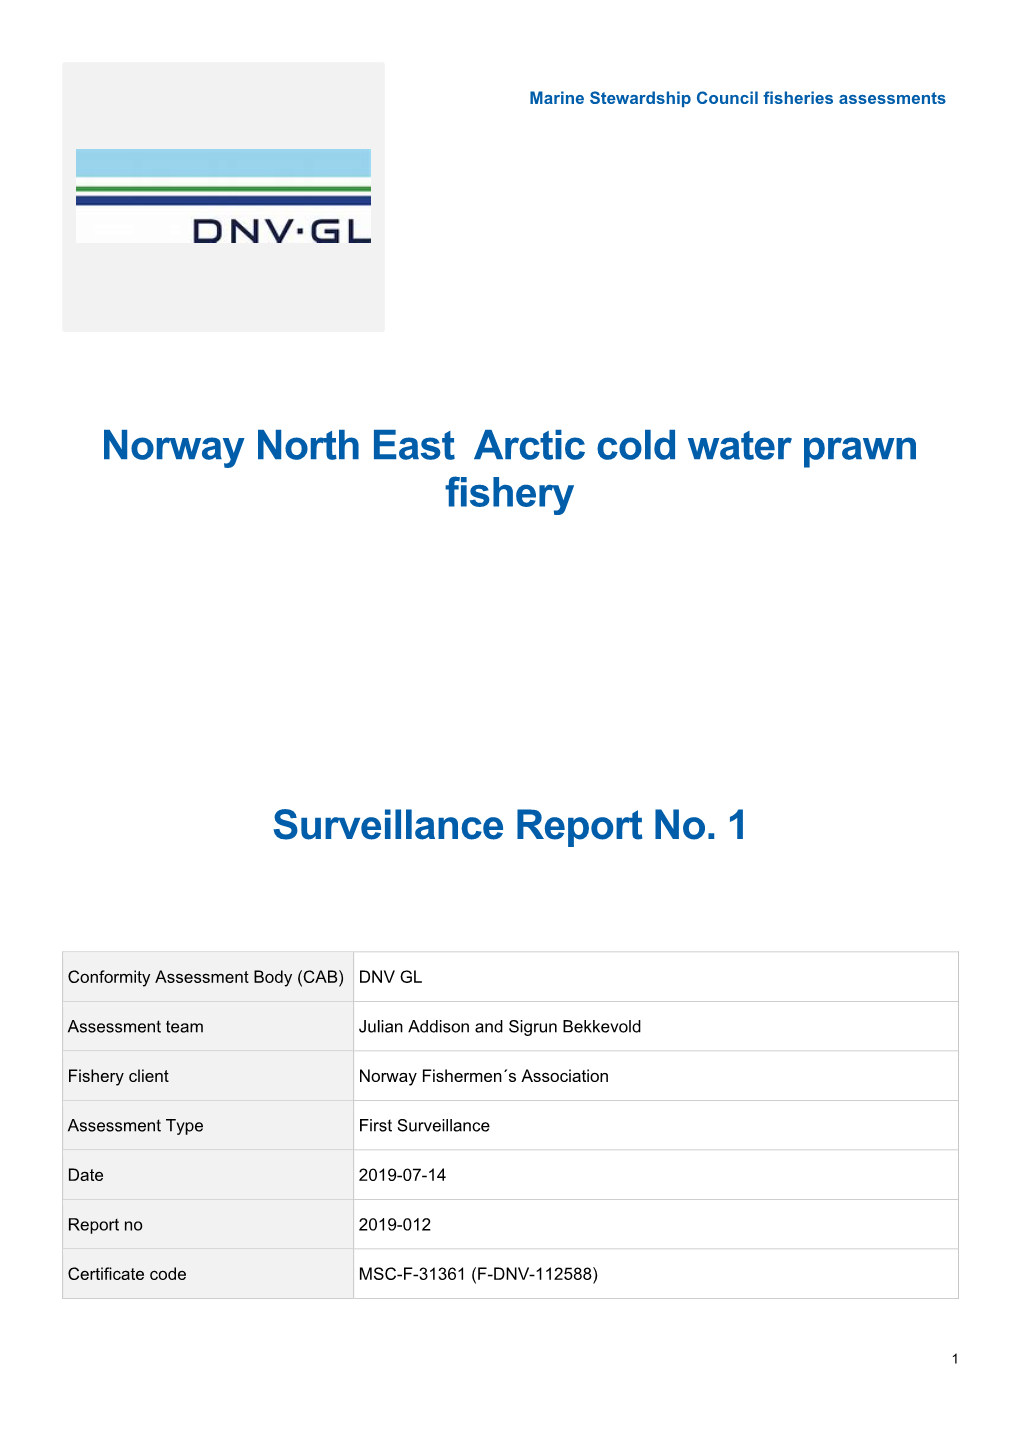 Norway North East Arctic Cold Water Prawn Fishery Surveillance Report